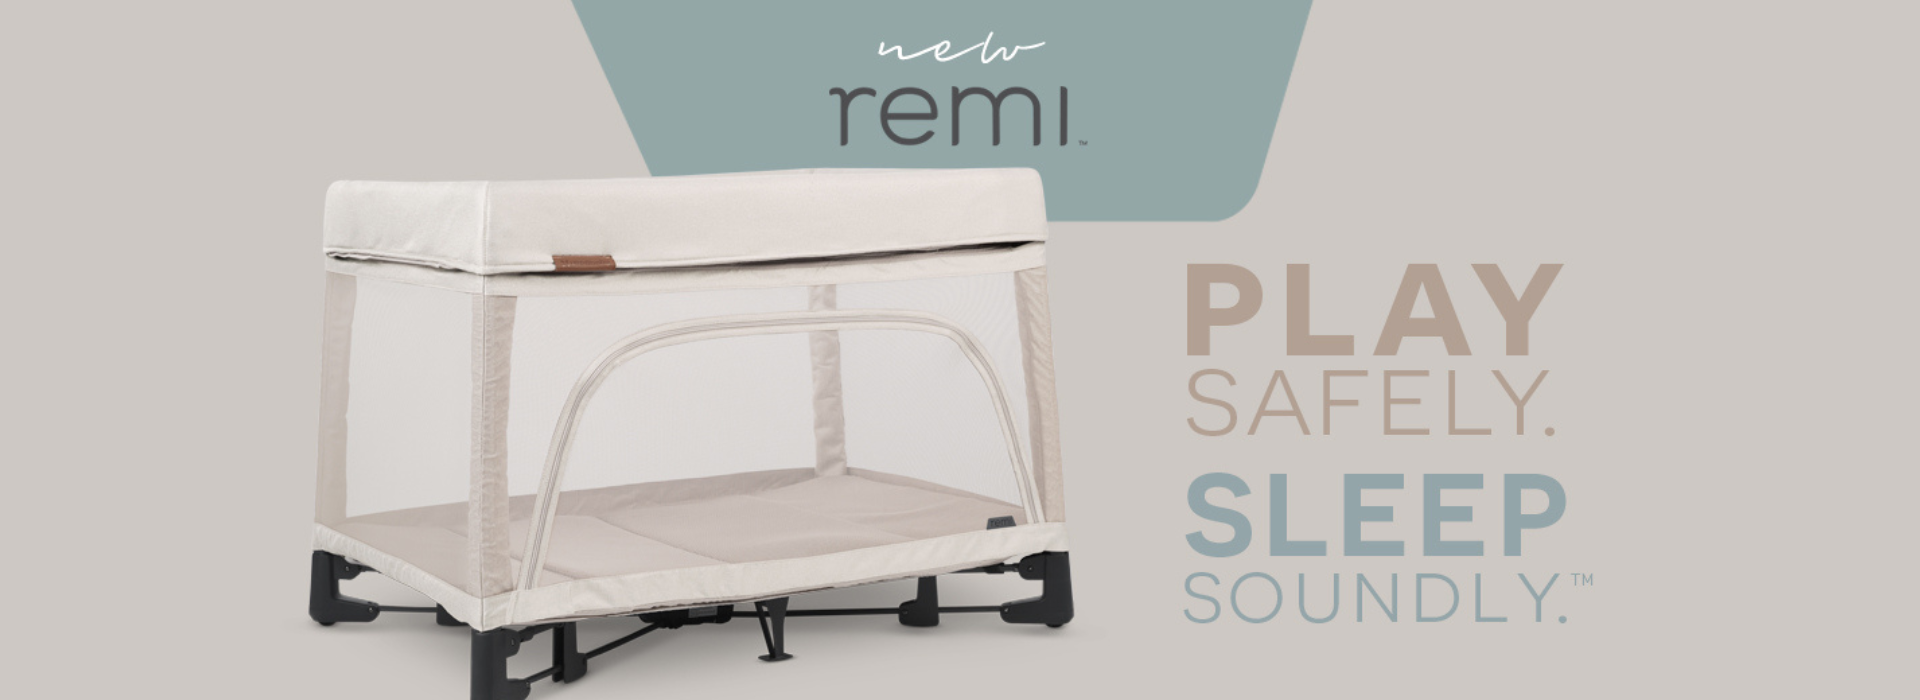 uppababy remi